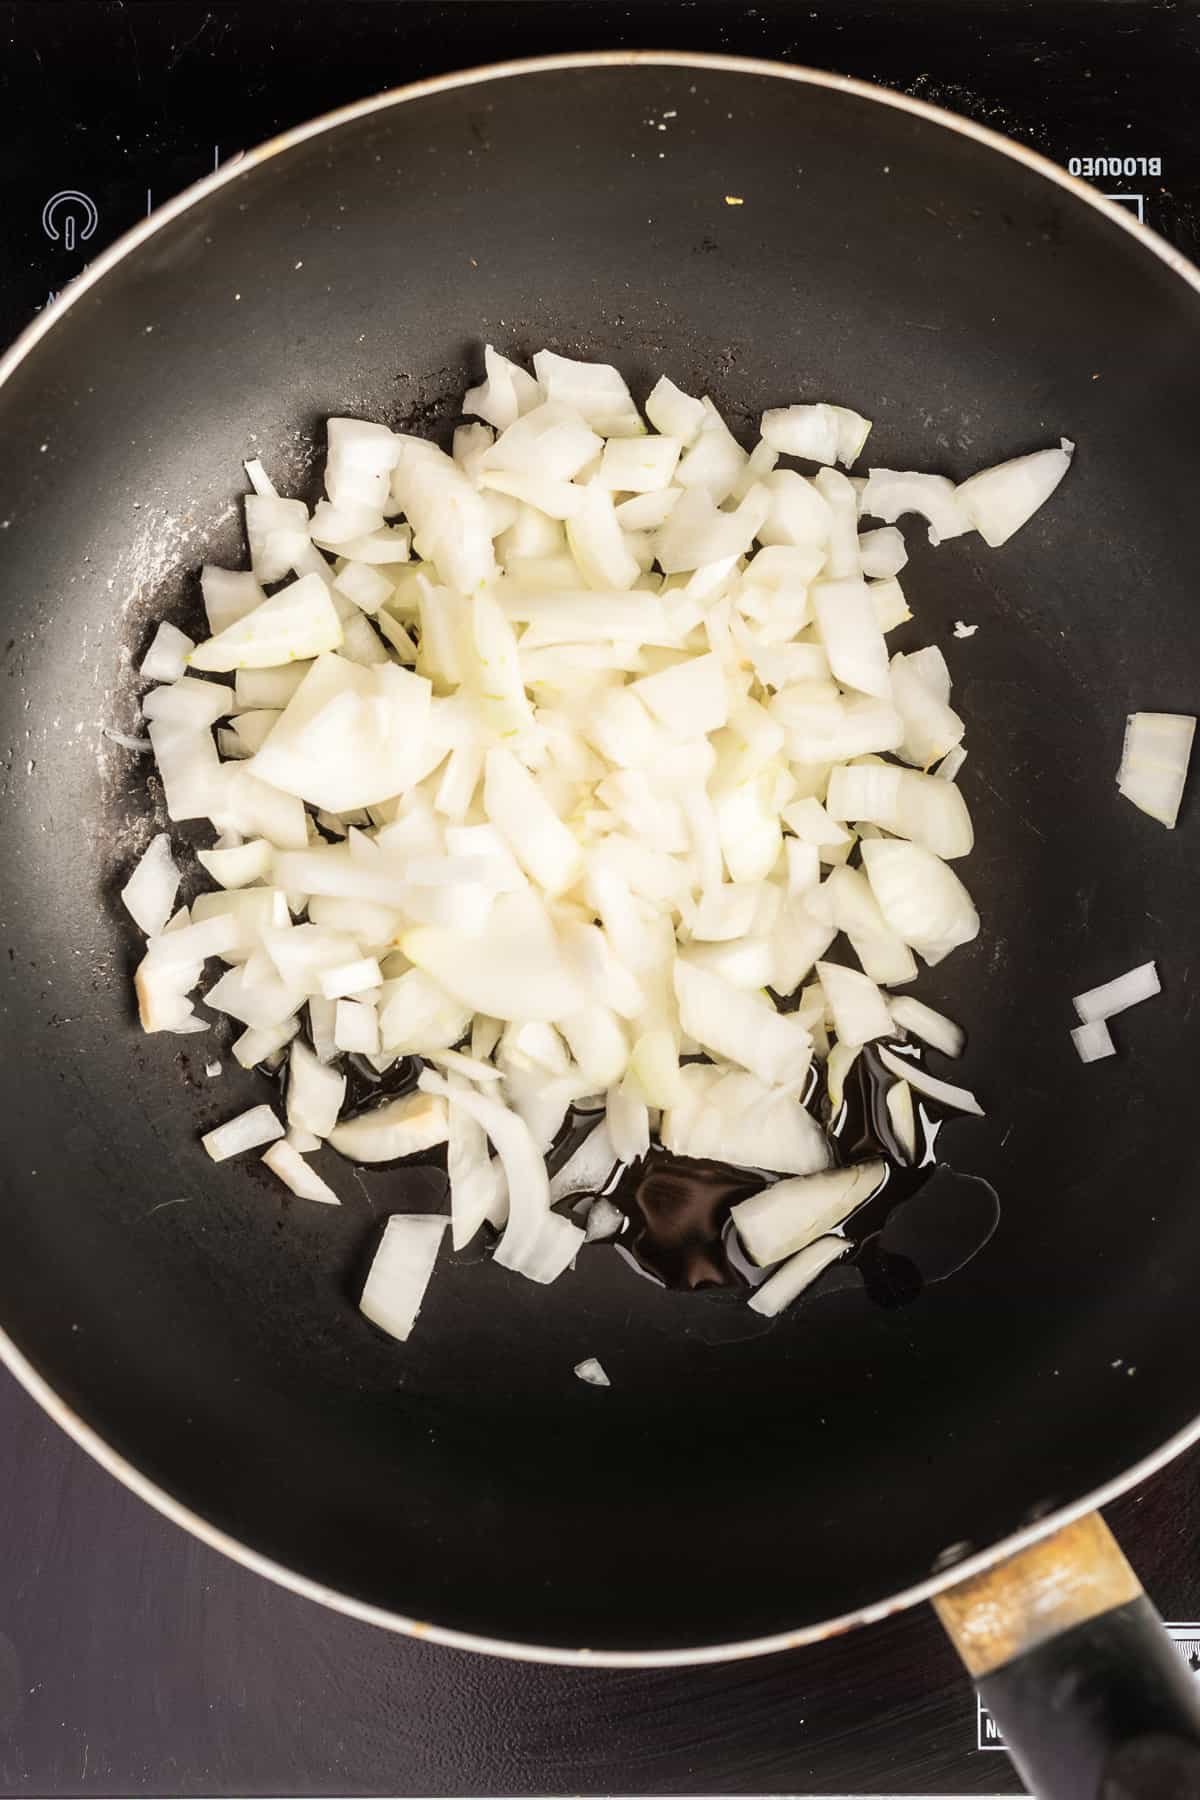 Overhead view of a pan with avocado oil and chopped onions.